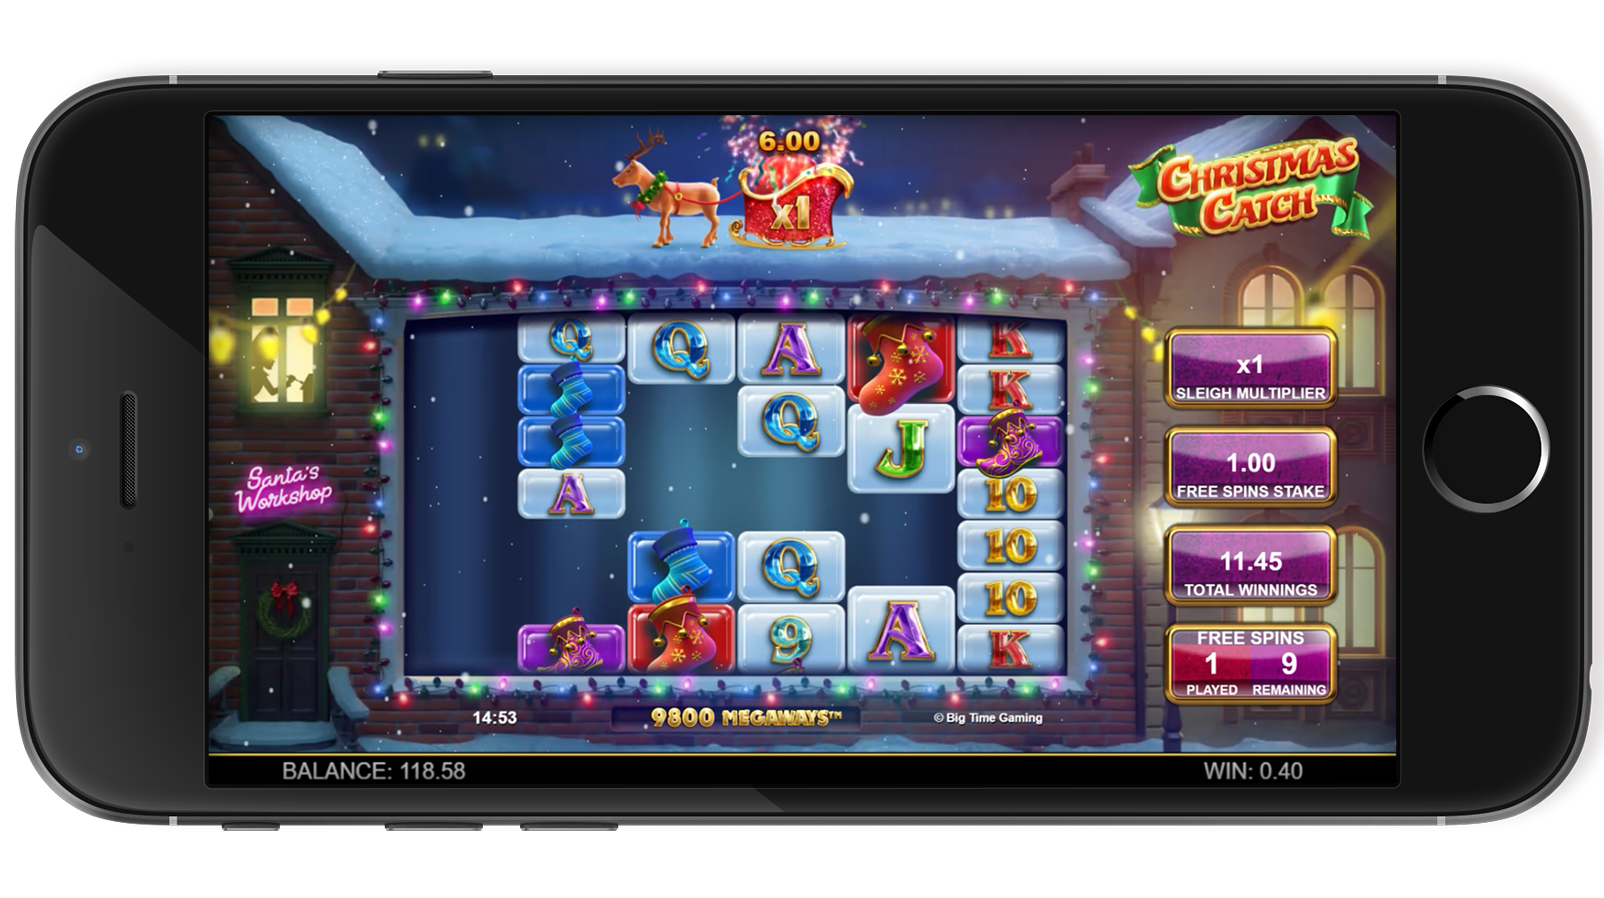 ChristmasCatch_FreeSpins_2_mobile.png